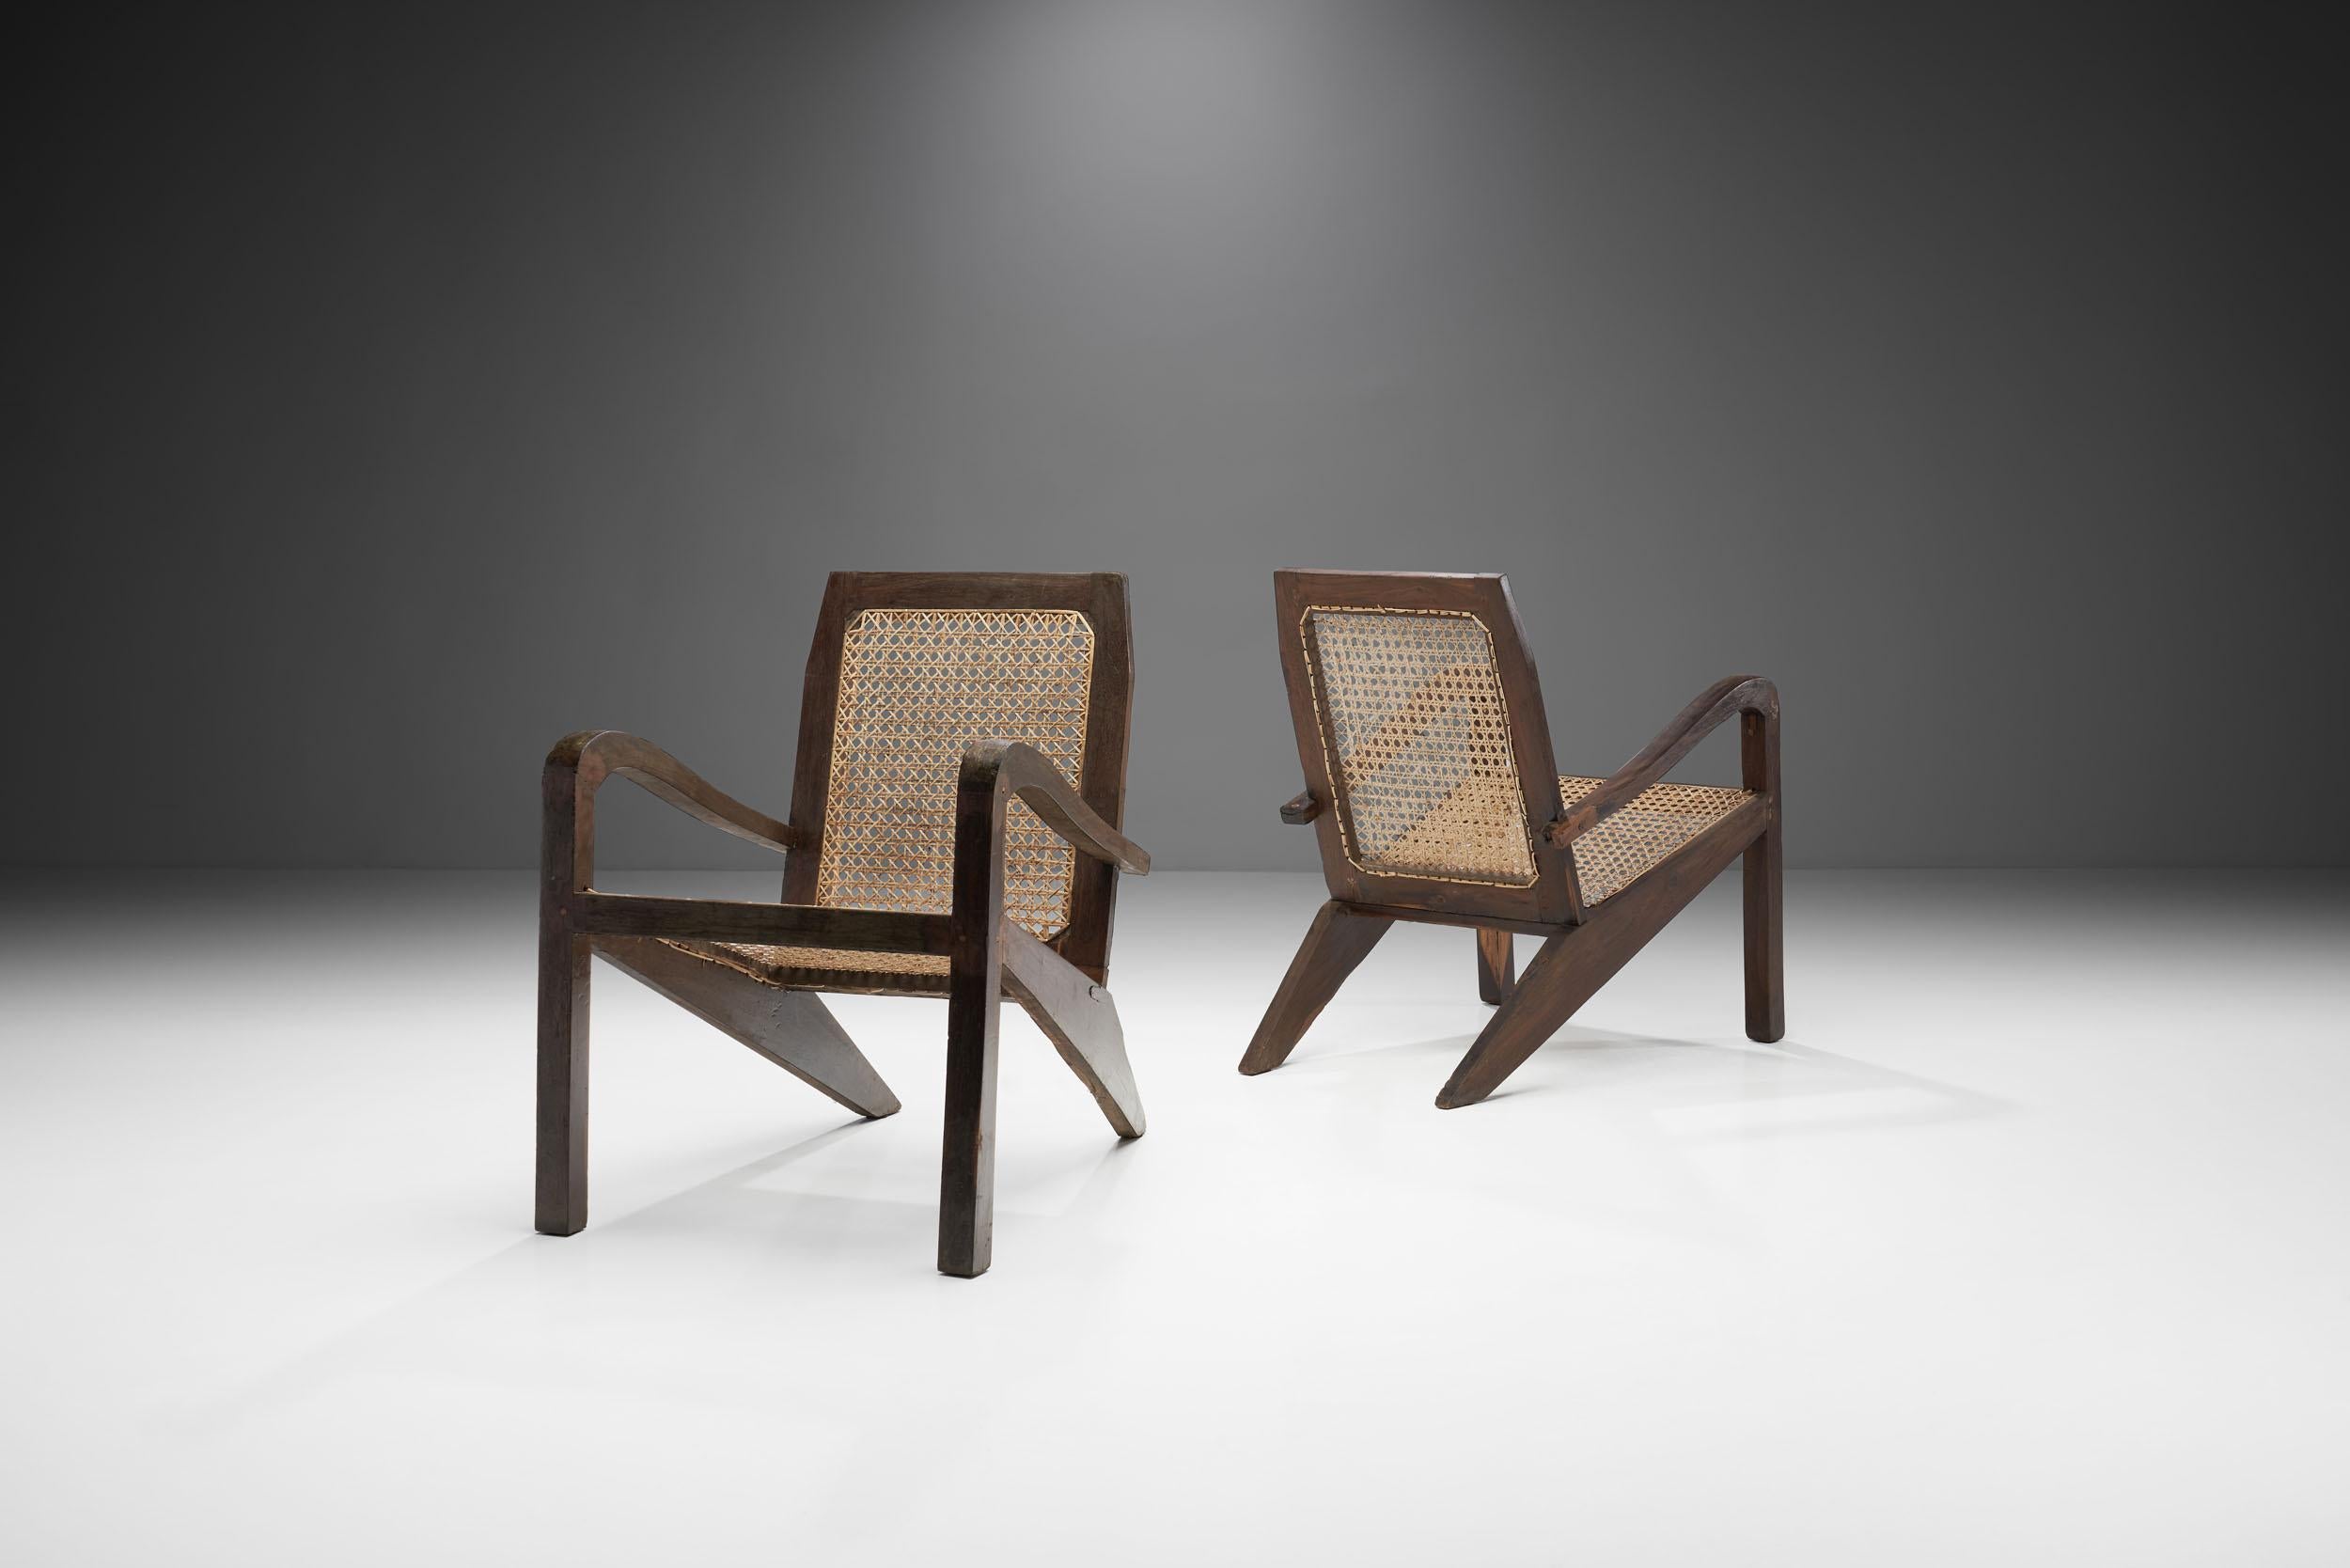 These rare Sri Lankan wood and cane chairs recall the midcentury style of Pierre Jeanneret, while being beautiful pieces on their own merit as well.

This pair is made of high-quality wood with the seat and back upholstered with cane. The organic